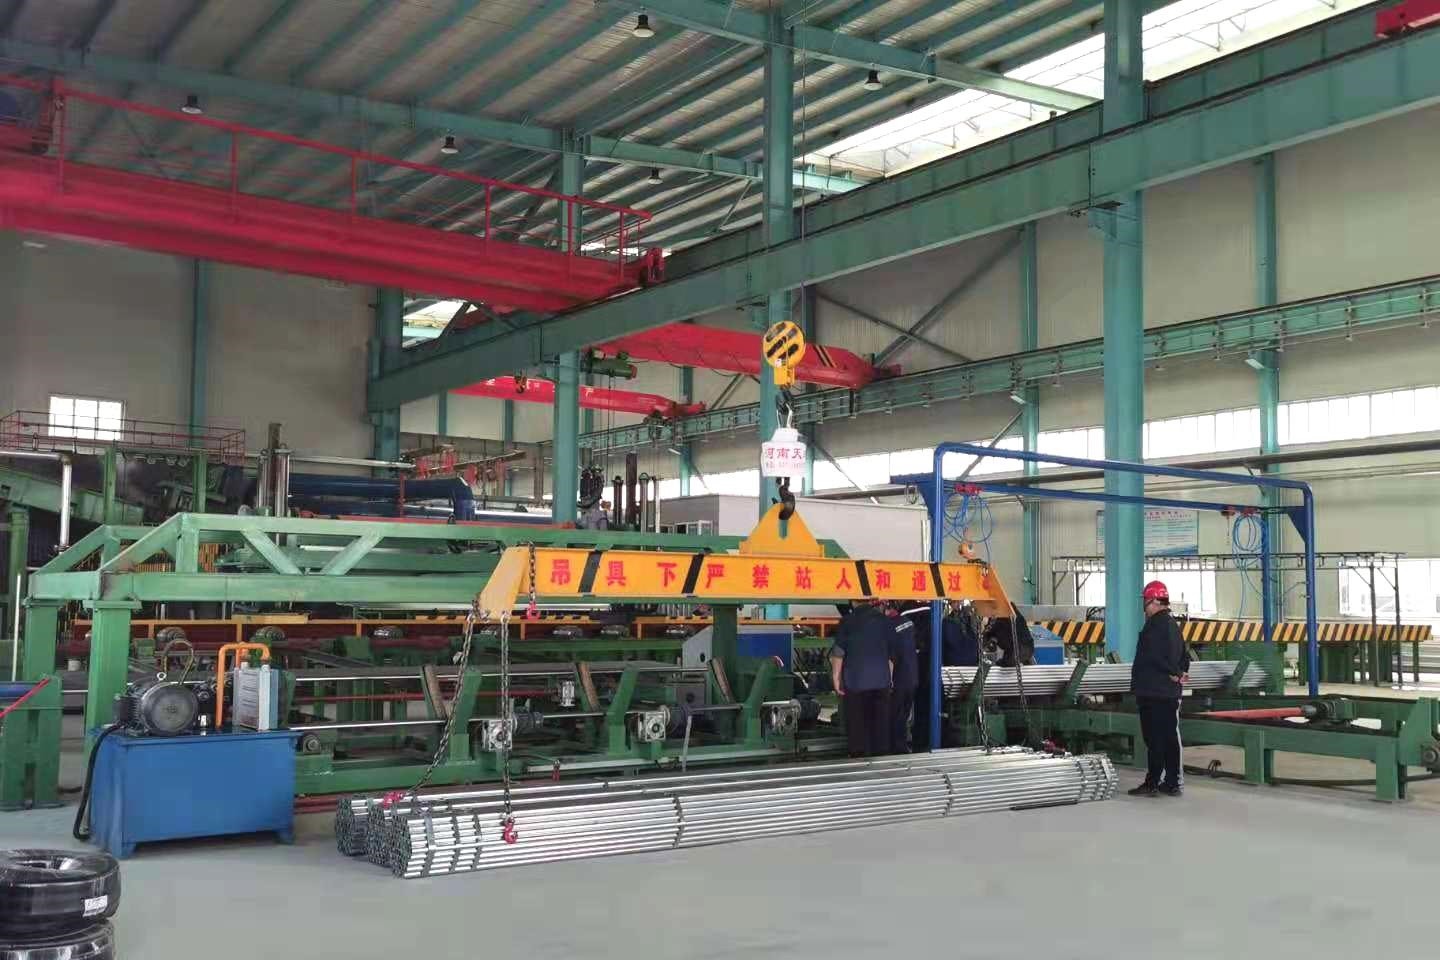 First hot dipped galvanizing line of Jianlong Steel put into